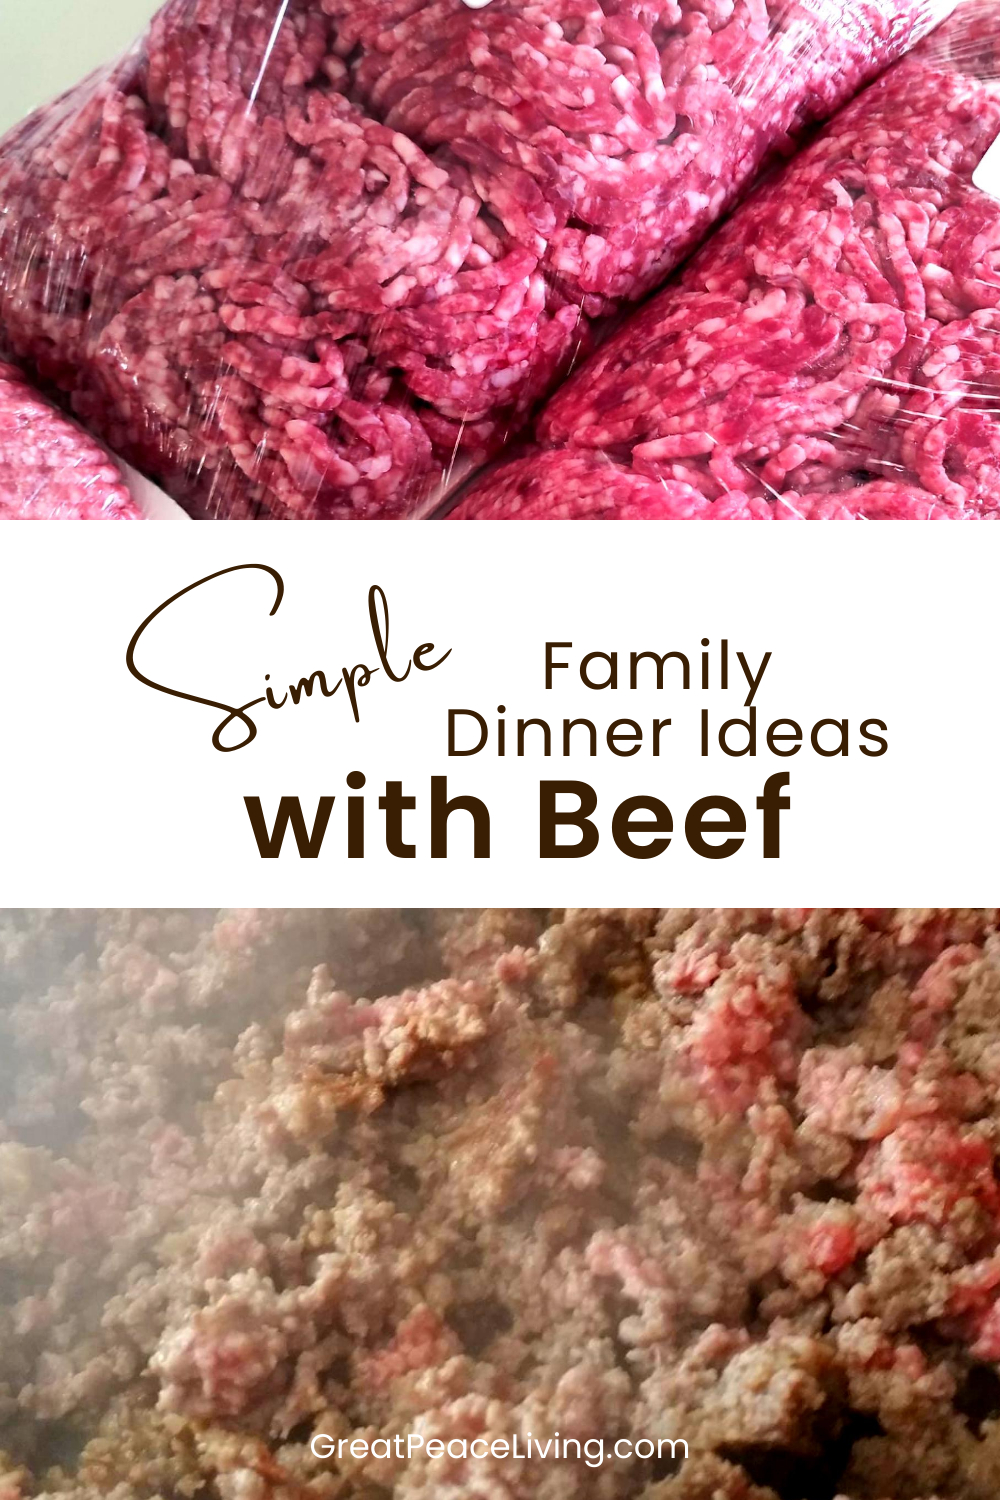 Simple Dinner Ideas with Beef